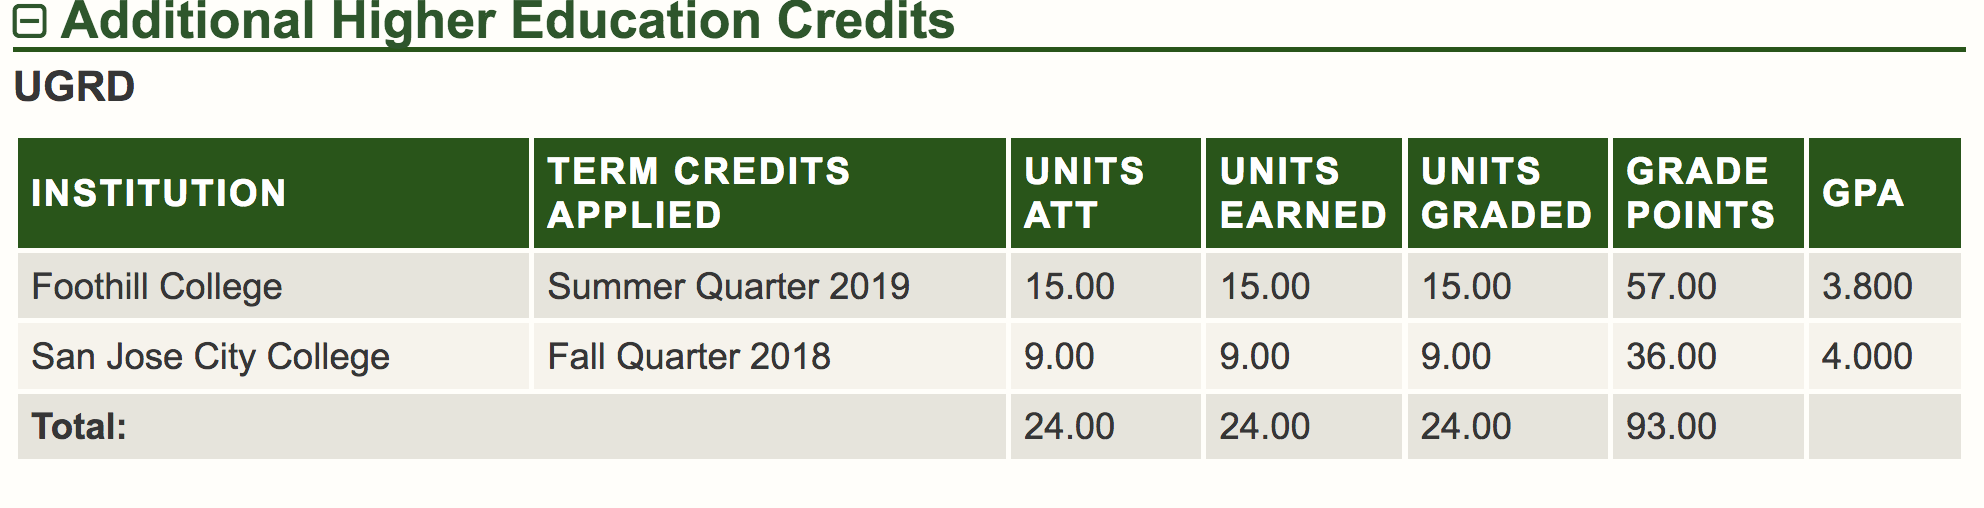 sample of what additional higher education credits look like in your portal